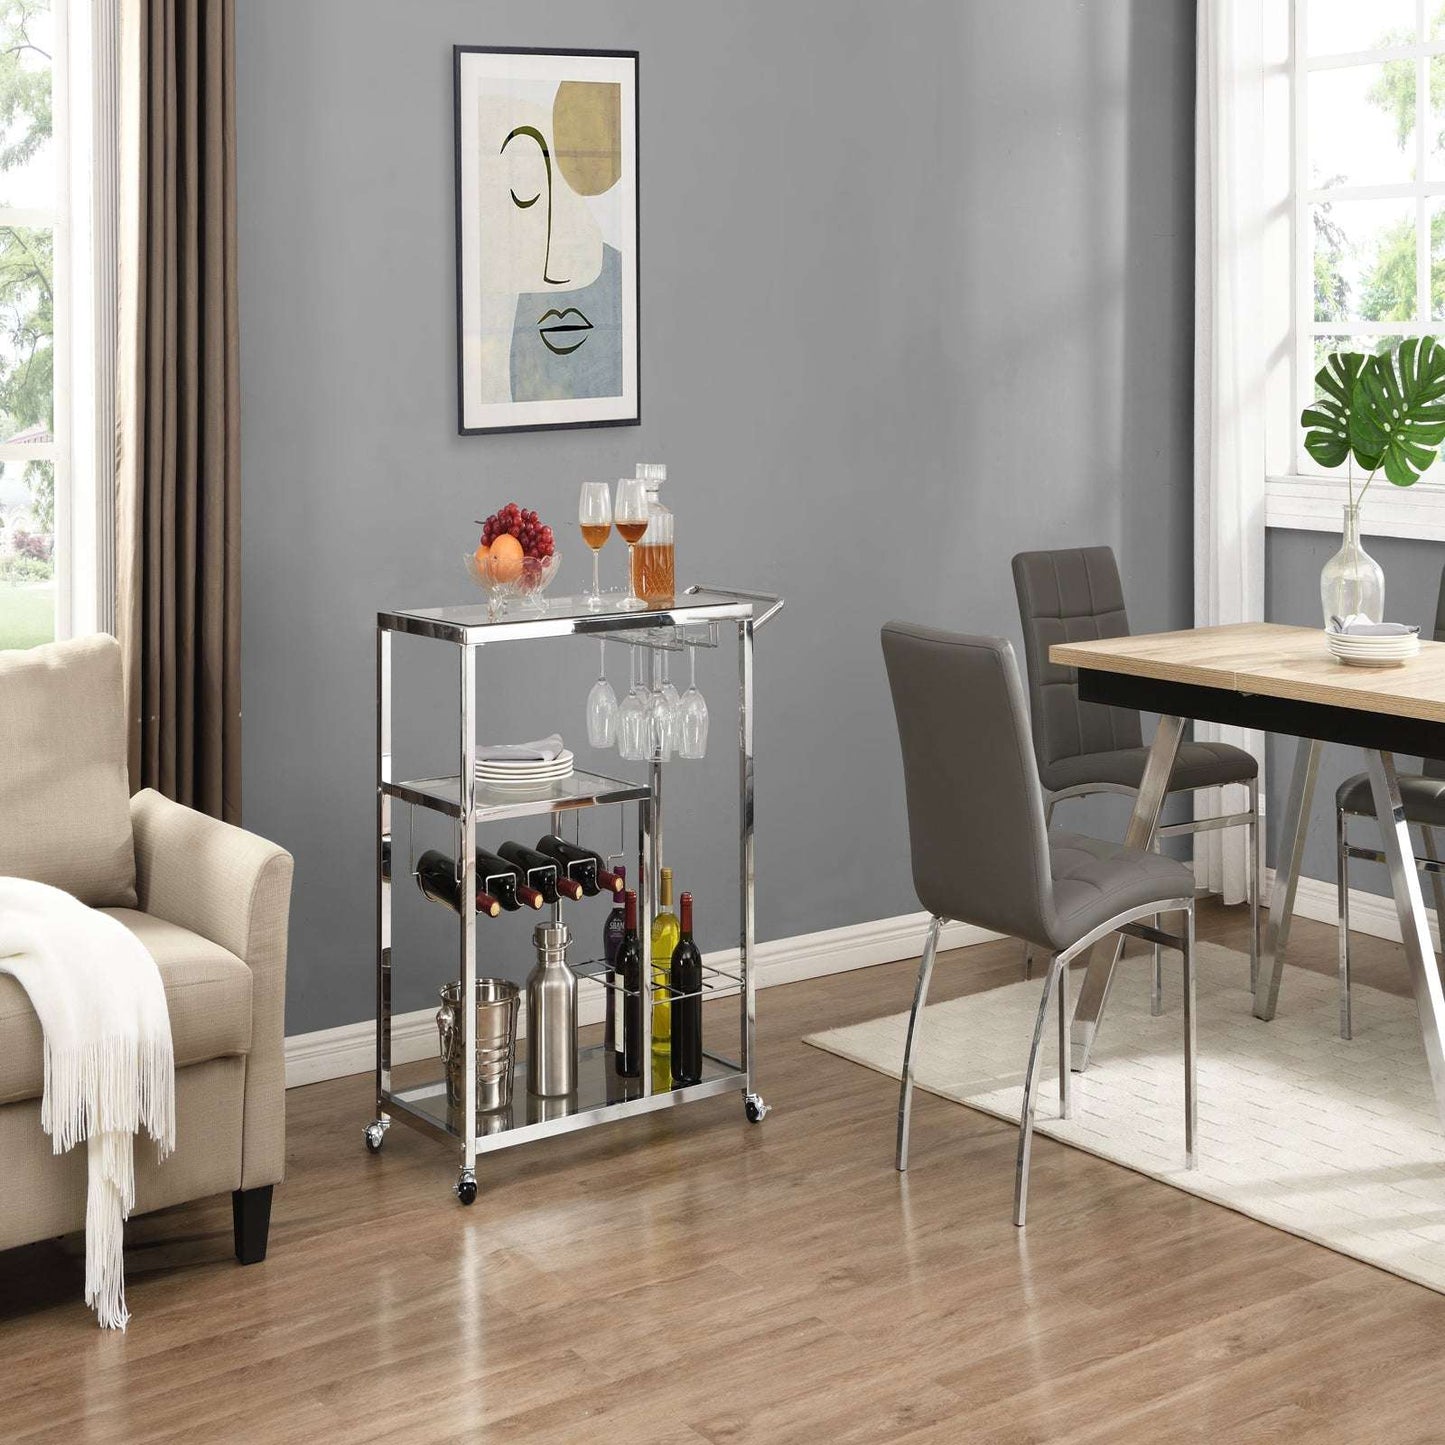 Contemporary Chrome Bar Serving Cart Silver Modern Glass Metal Frame Wine Storage (by quicklify)